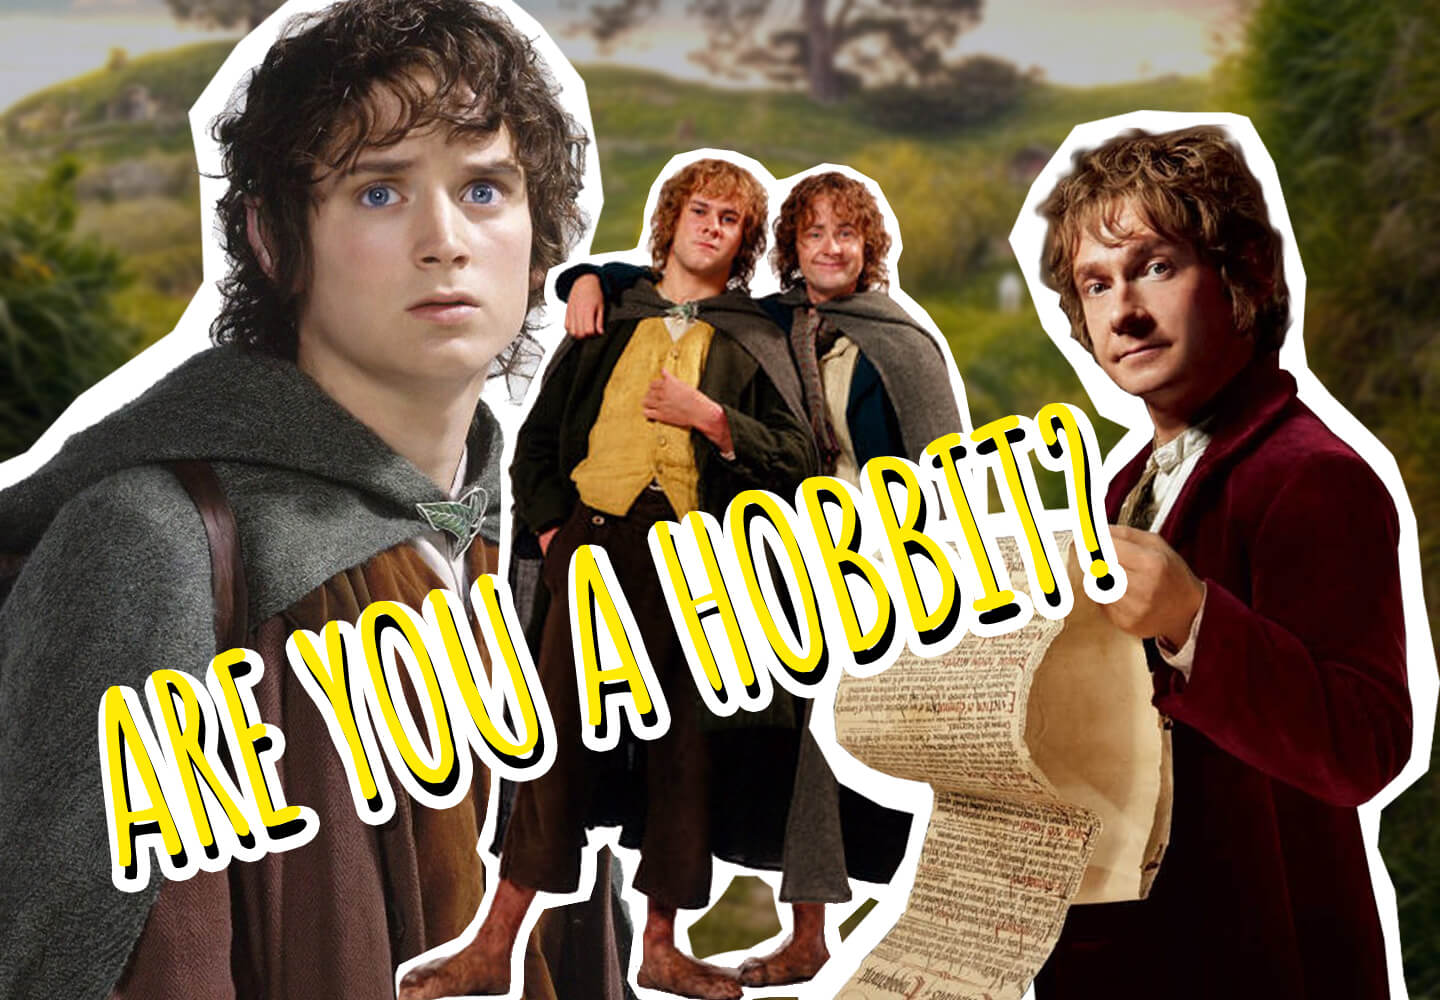 which hobbit are you